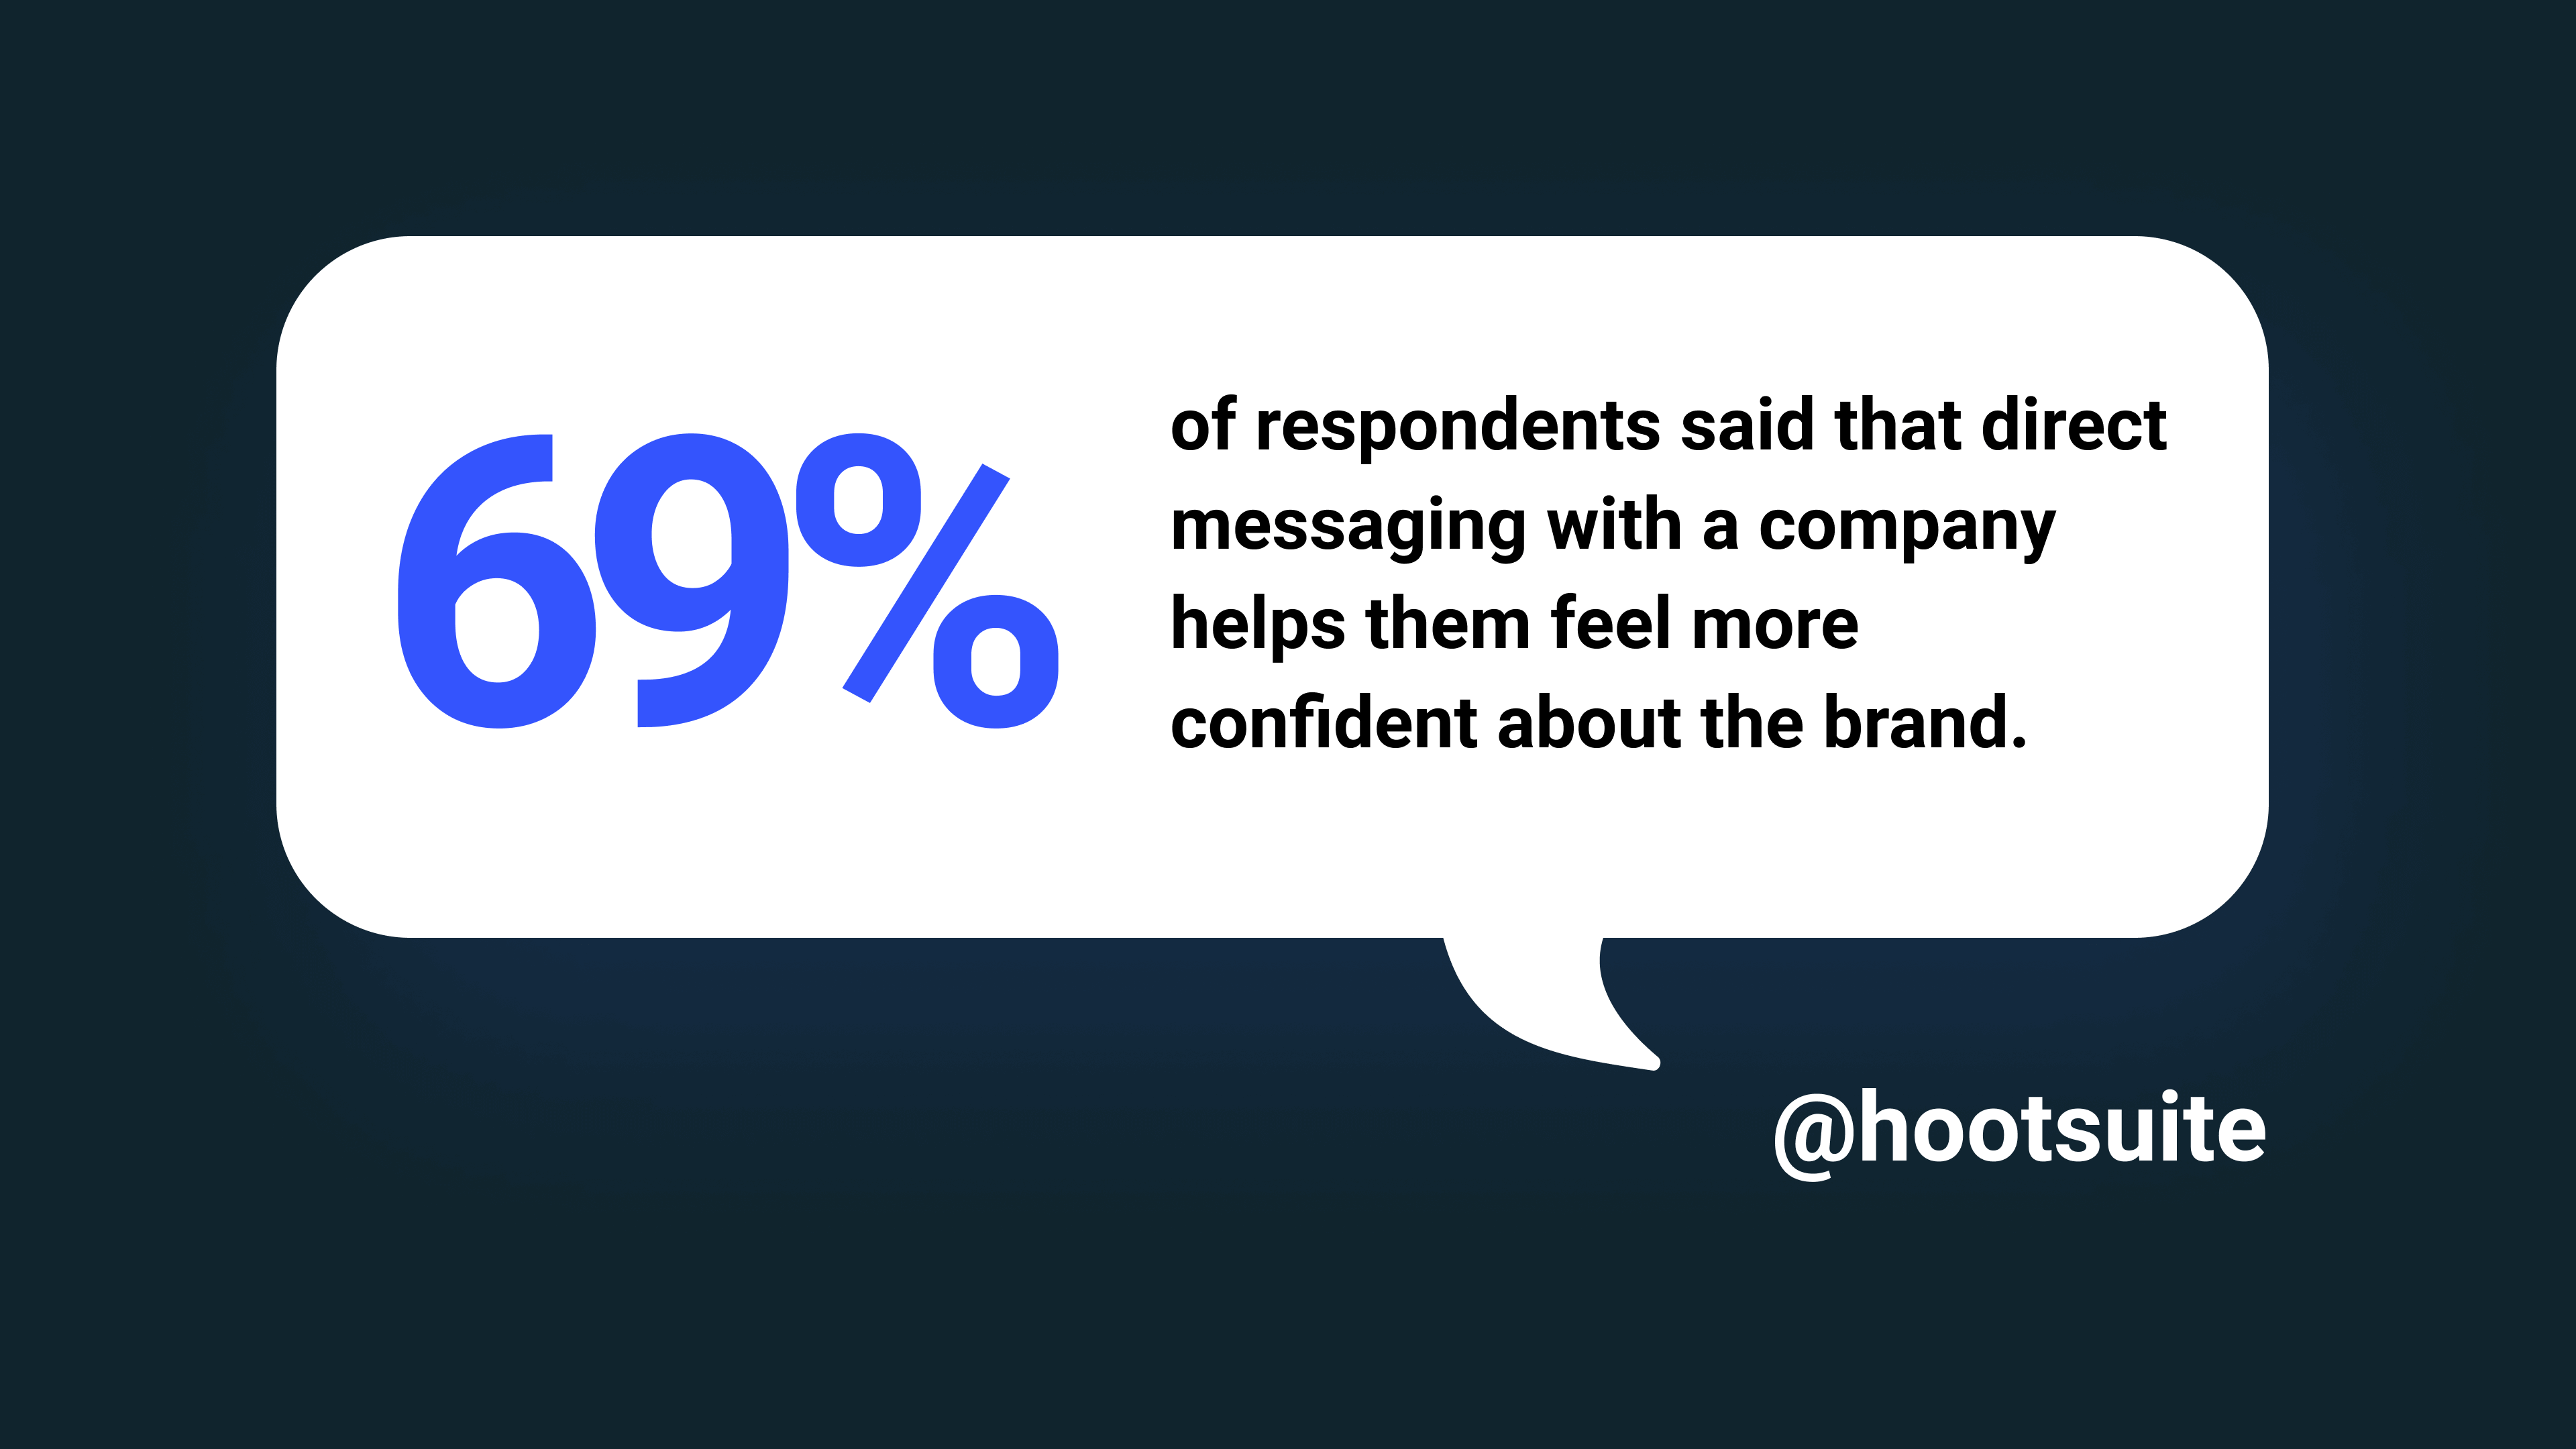 According to Hootsuite, 69% of respondents said that direct messaging with a company helps them feel more confident about the brand. 